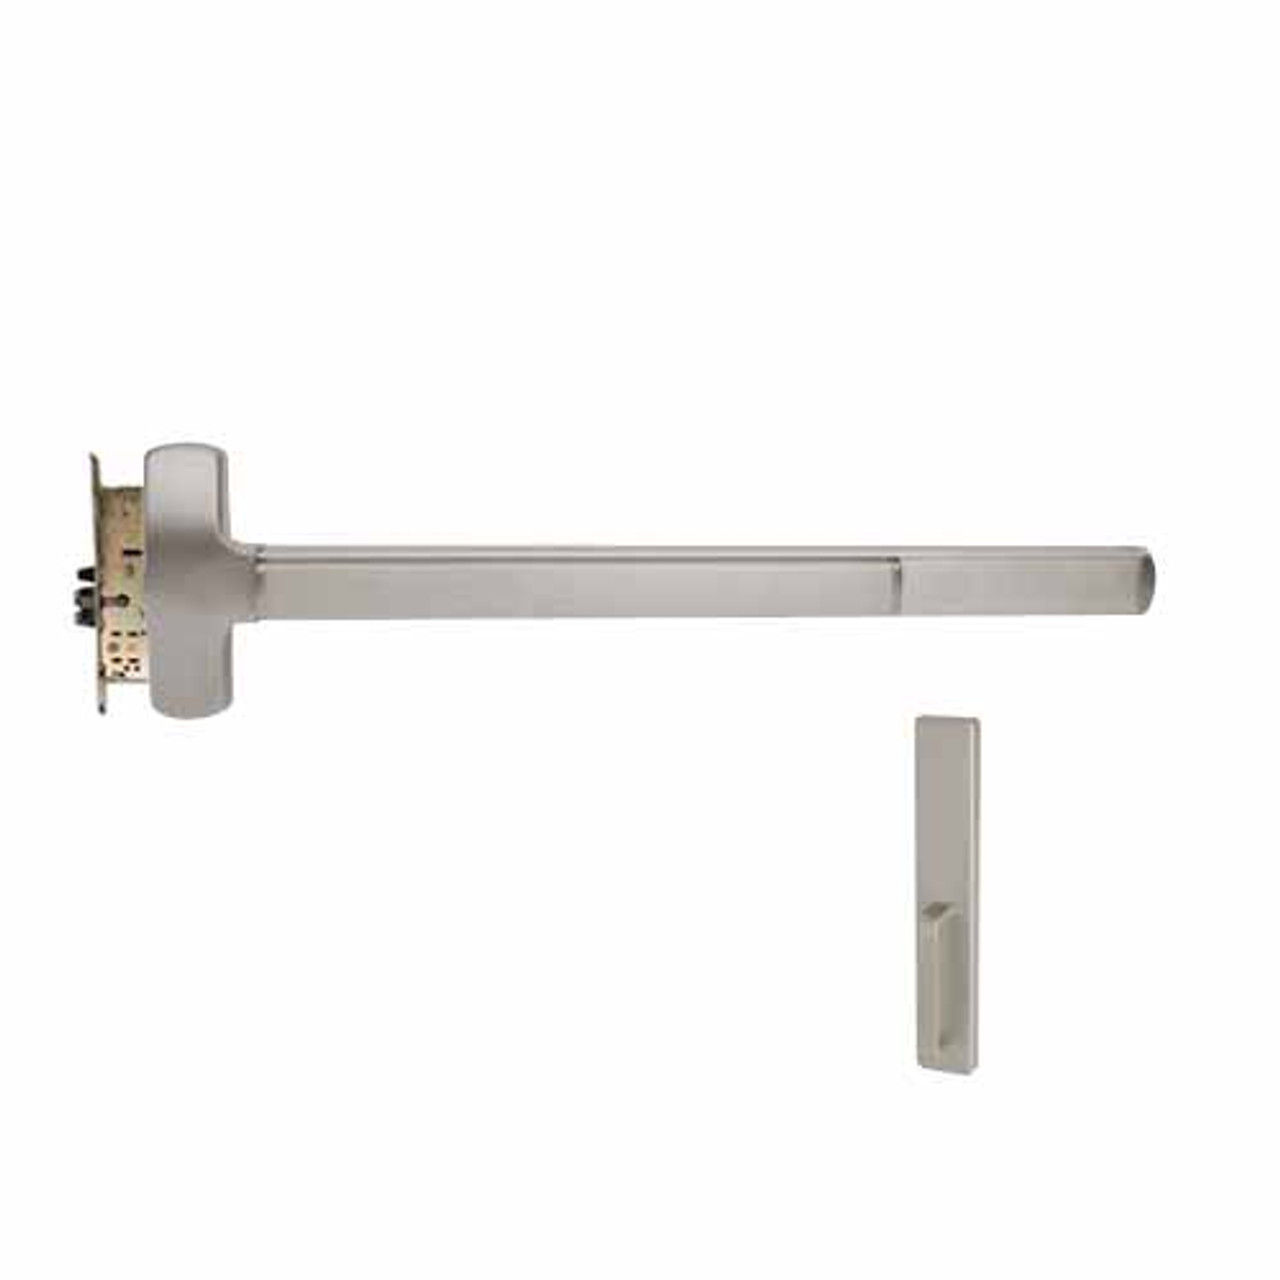 F-25-M-DT-US32D-4-LHR Falcon Exit Device in Satin Stainless Steel